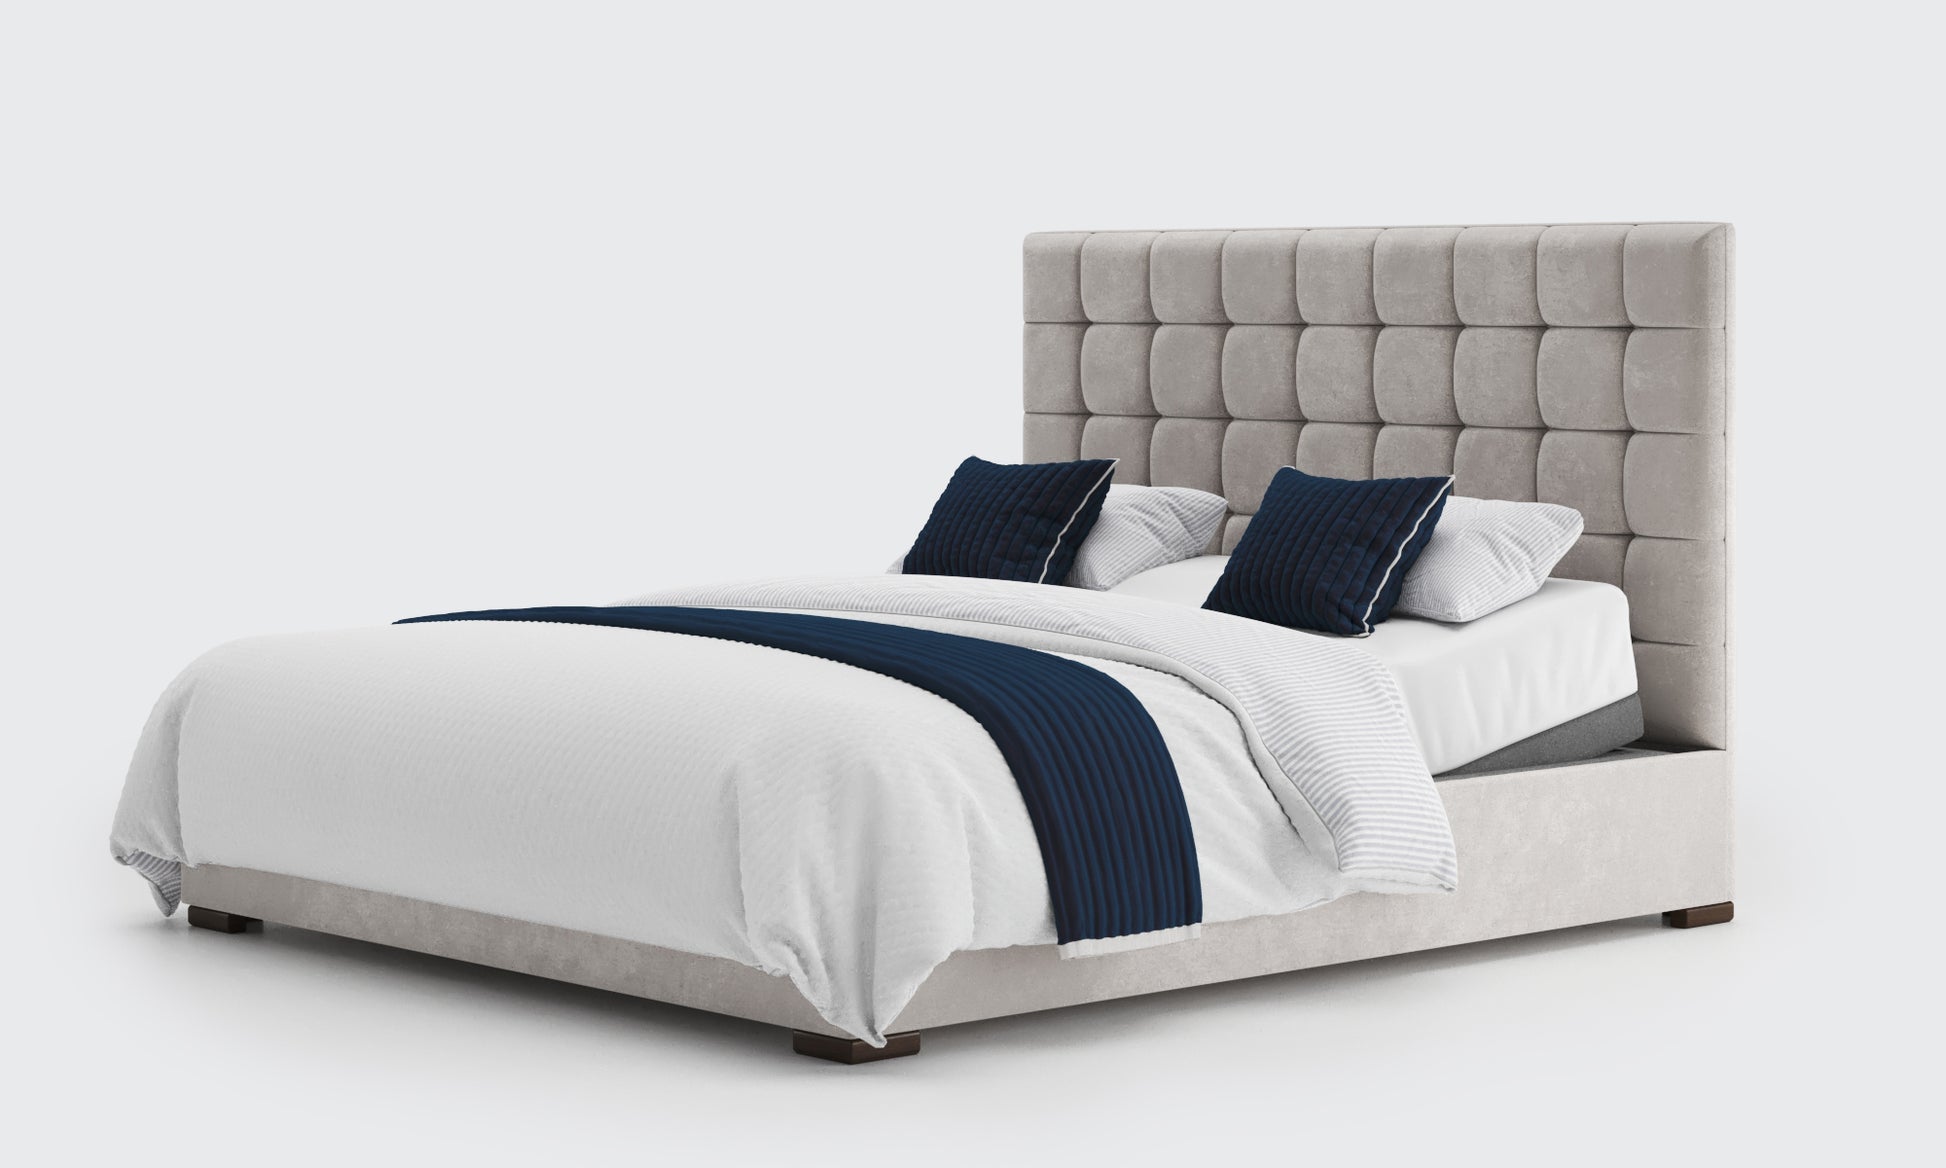 stratton 6ft double bed and mattress in the cream velvet material